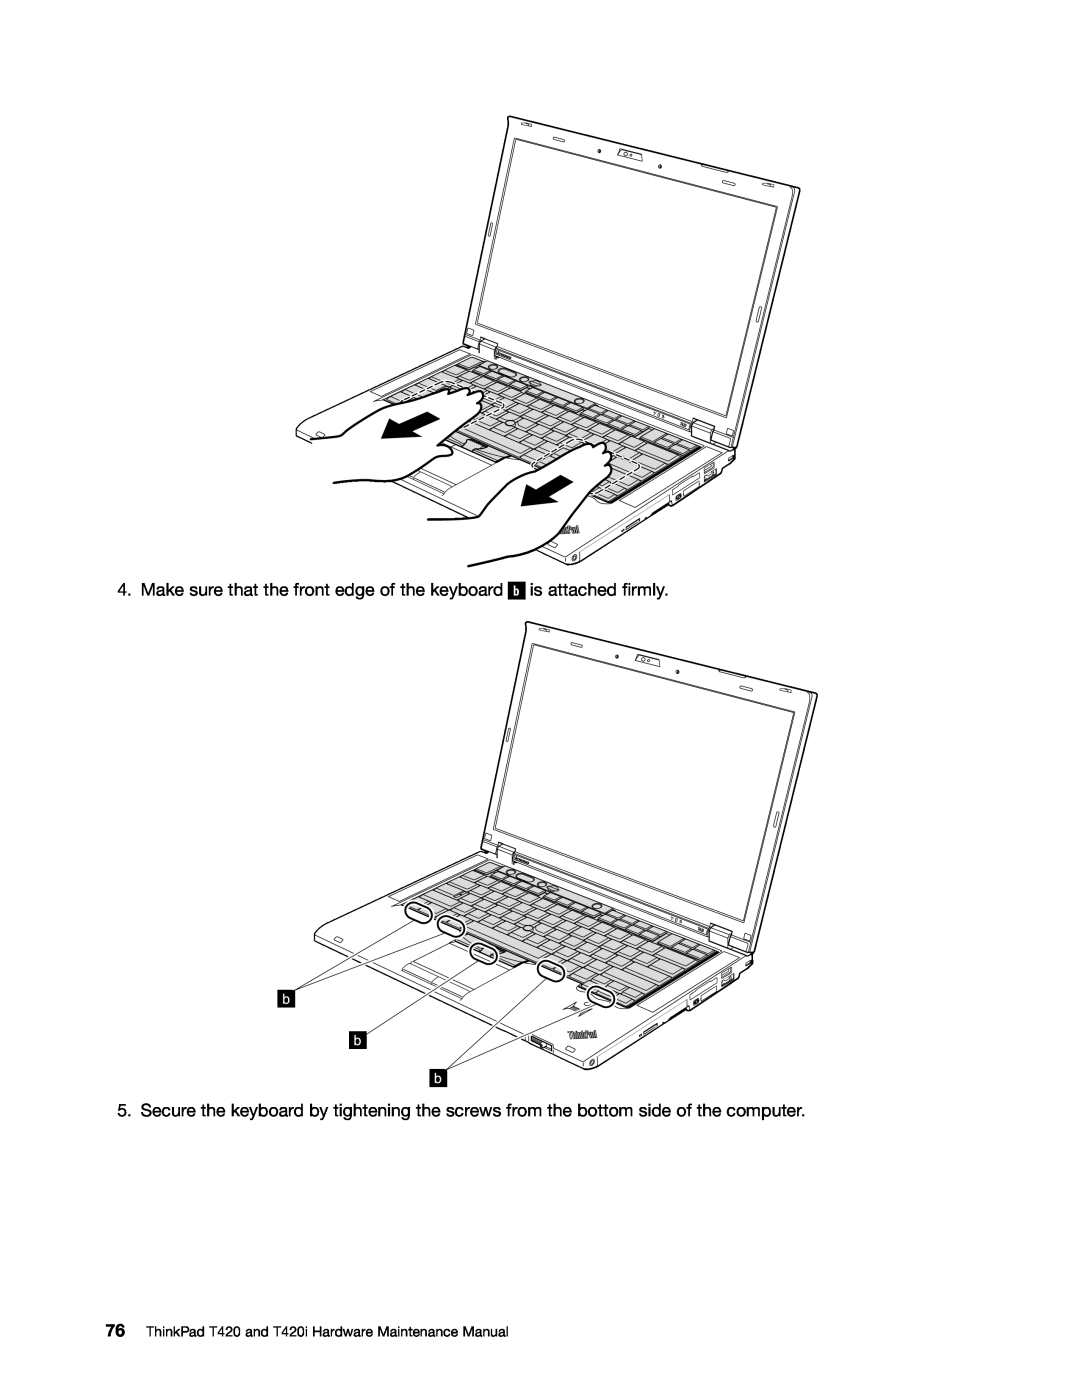 Lenovo T420i manual Make sure that the front edge of the keyboard, is attached firmly 